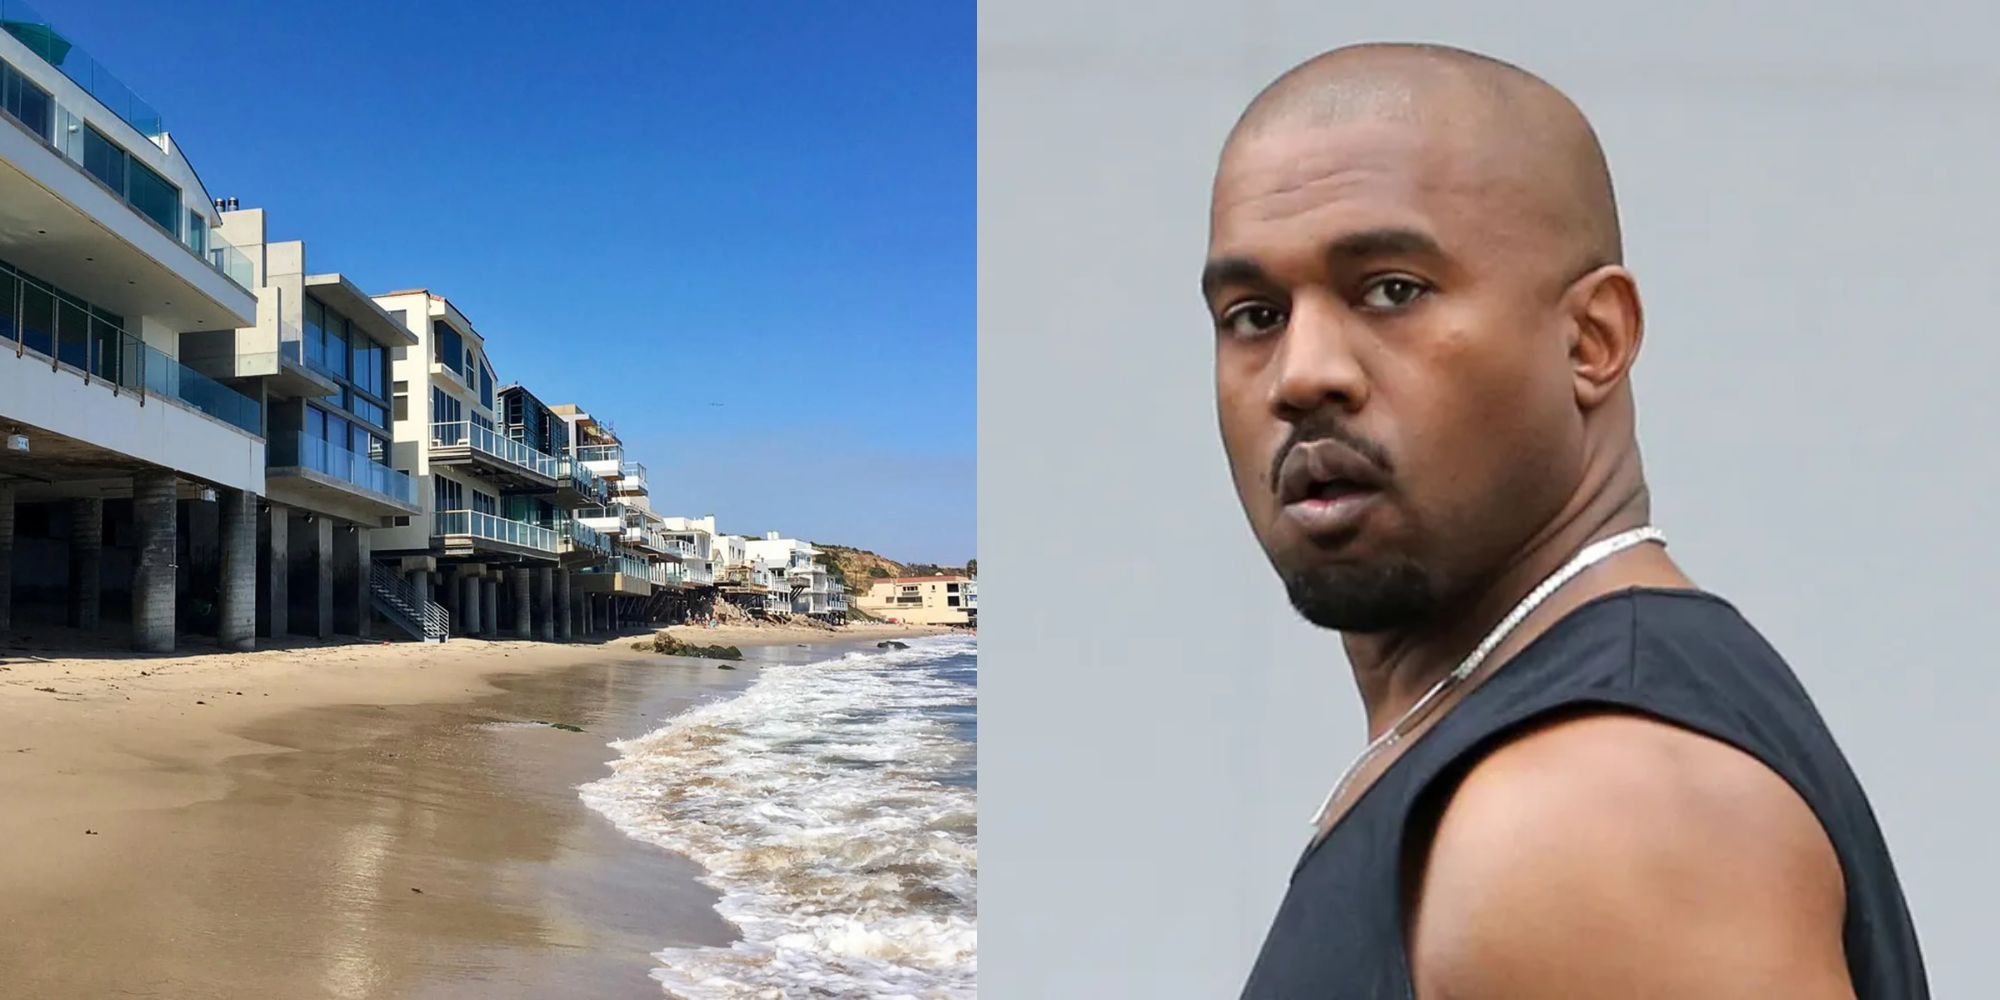 A Lawyer Places a Lien on Kanye West's Malibu Residence, Just Shy of One Month after the Property Was Listed for Sale